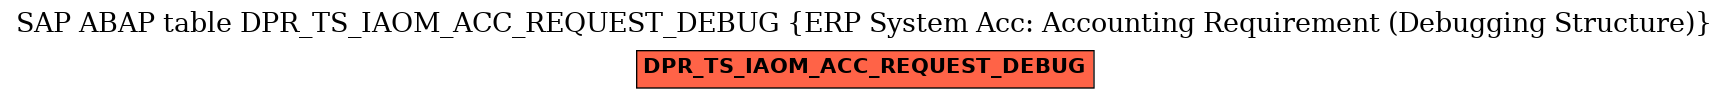 E-R Diagram for table DPR_TS_IAOM_ACC_REQUEST_DEBUG (ERP System Acc: Accounting Requirement (Debugging Structure))